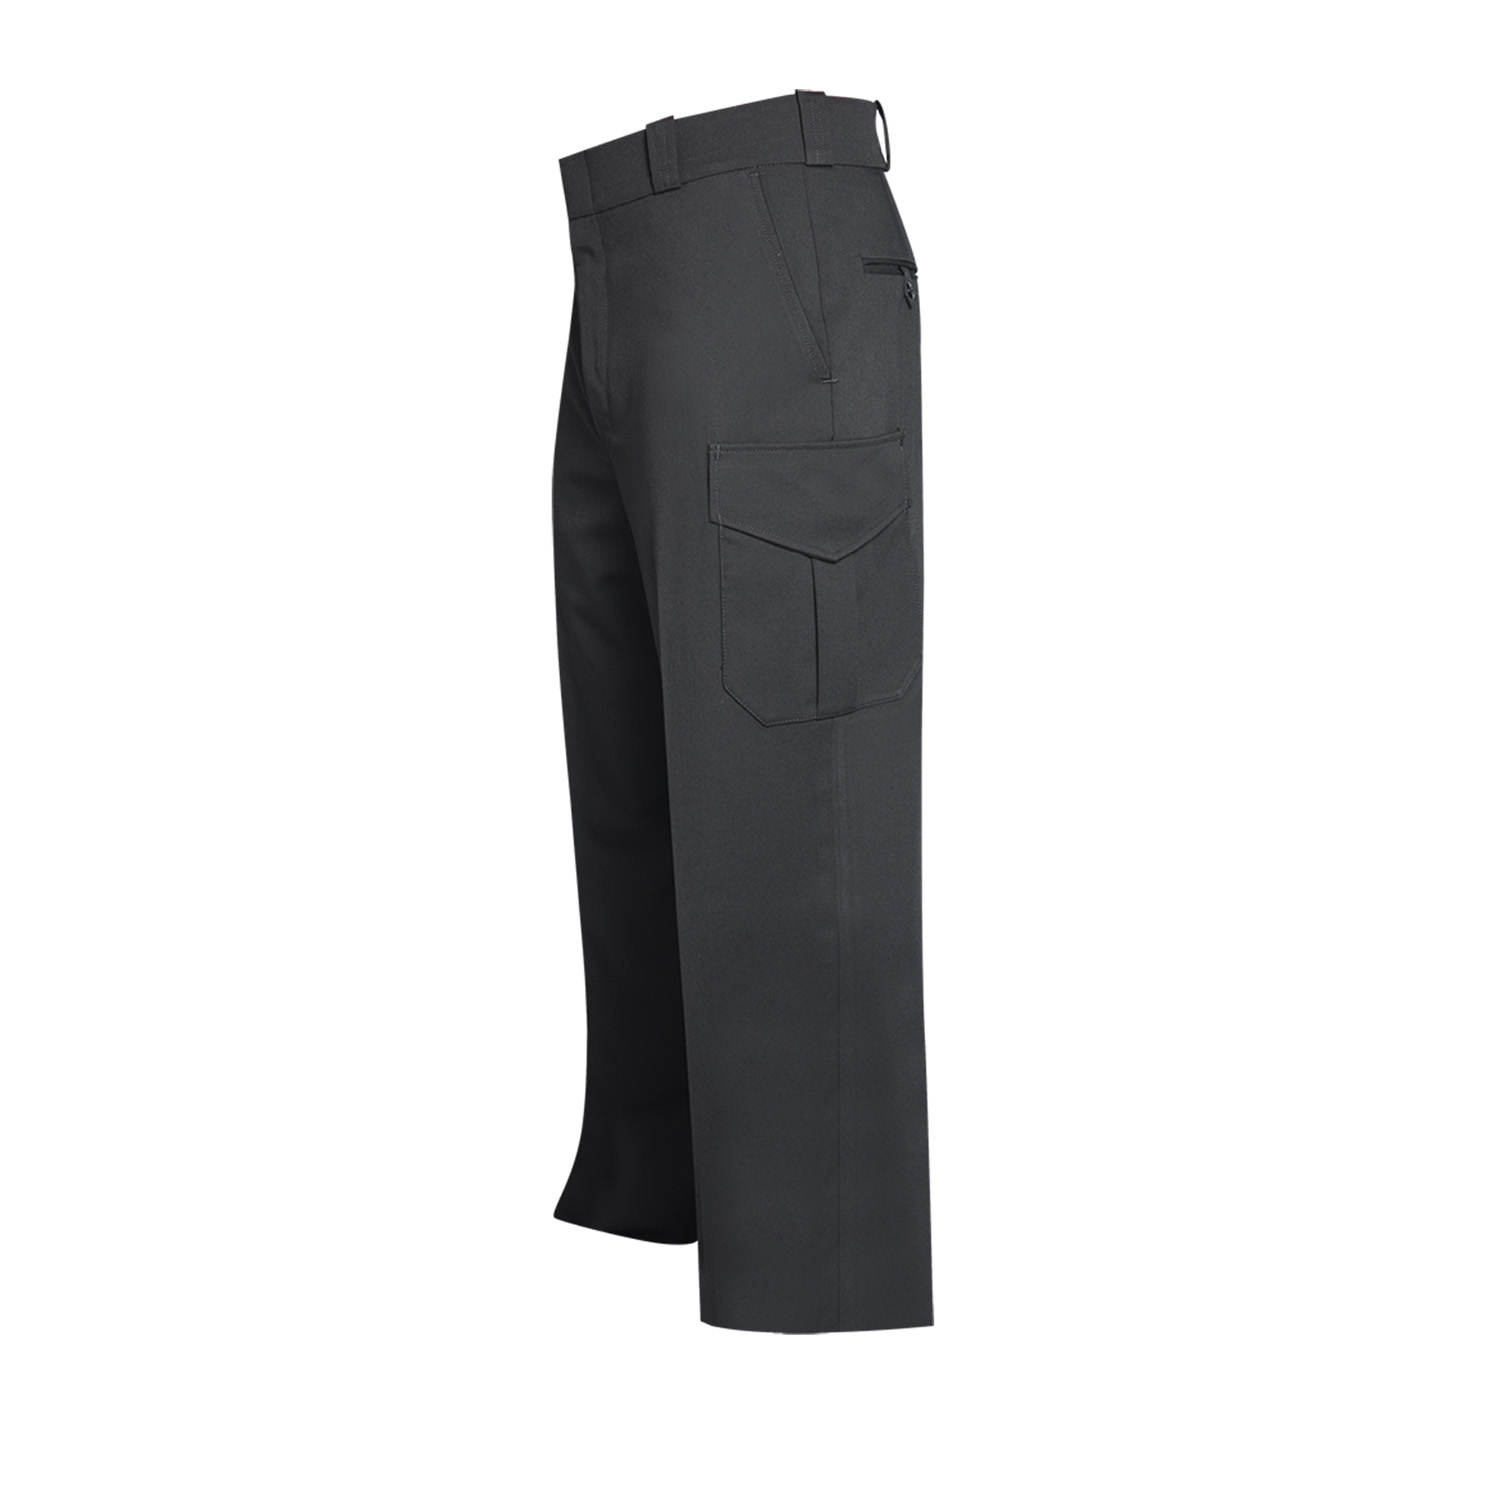 FLYING CROSS COMMAND WEAR PANTS WITH FREEDOM FLEX